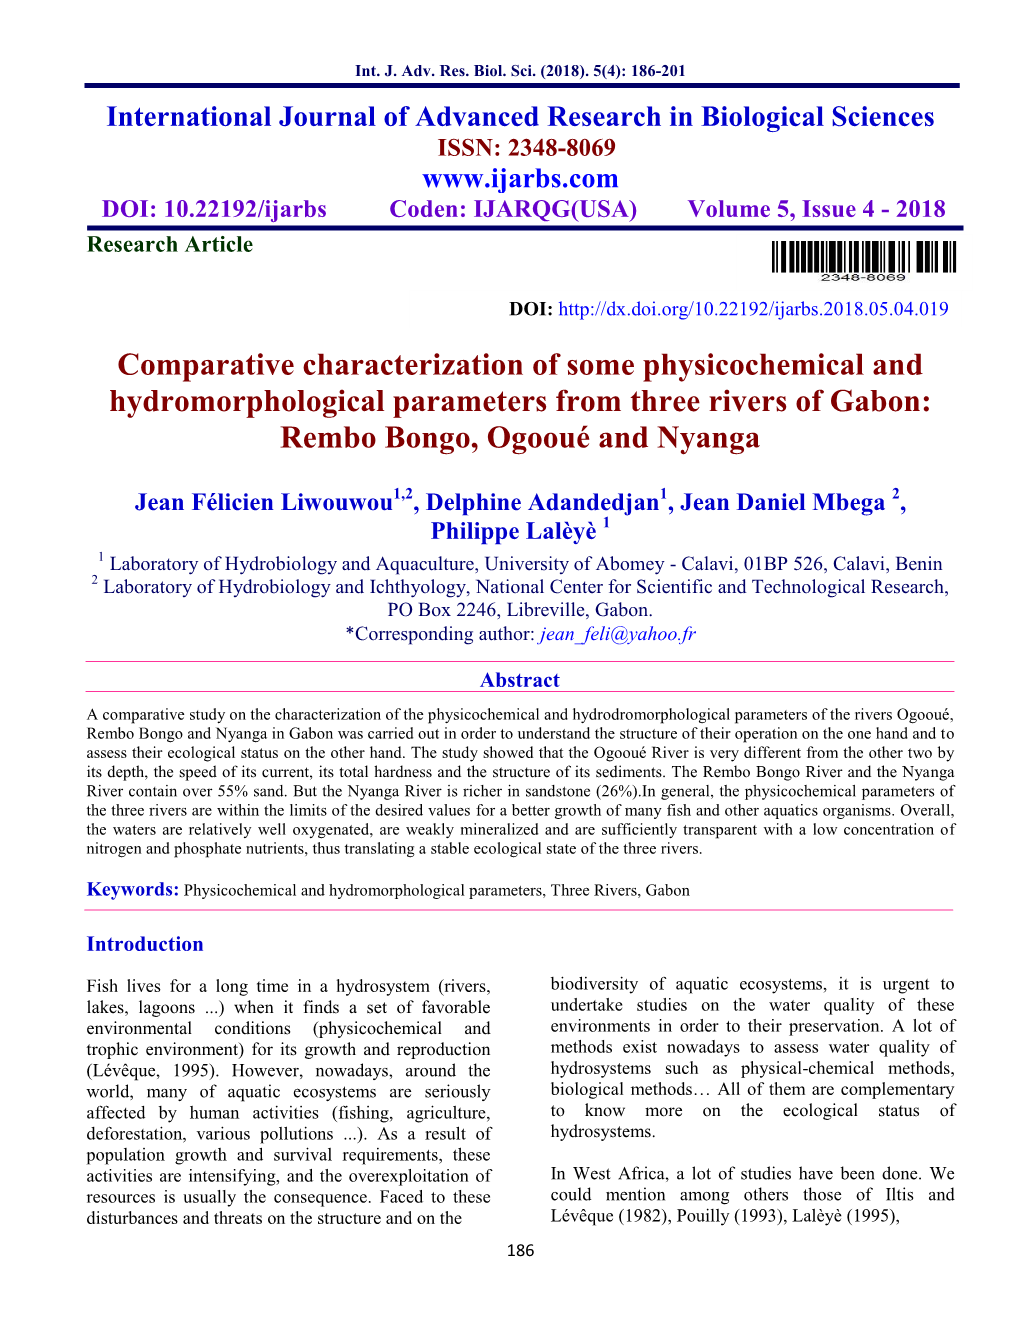 Comparative Characterization of Some Physicochemical and Hydromorphological Parameters from Three Rivers of Gabon: Rembo Bongo, Ogooué and Nyanga